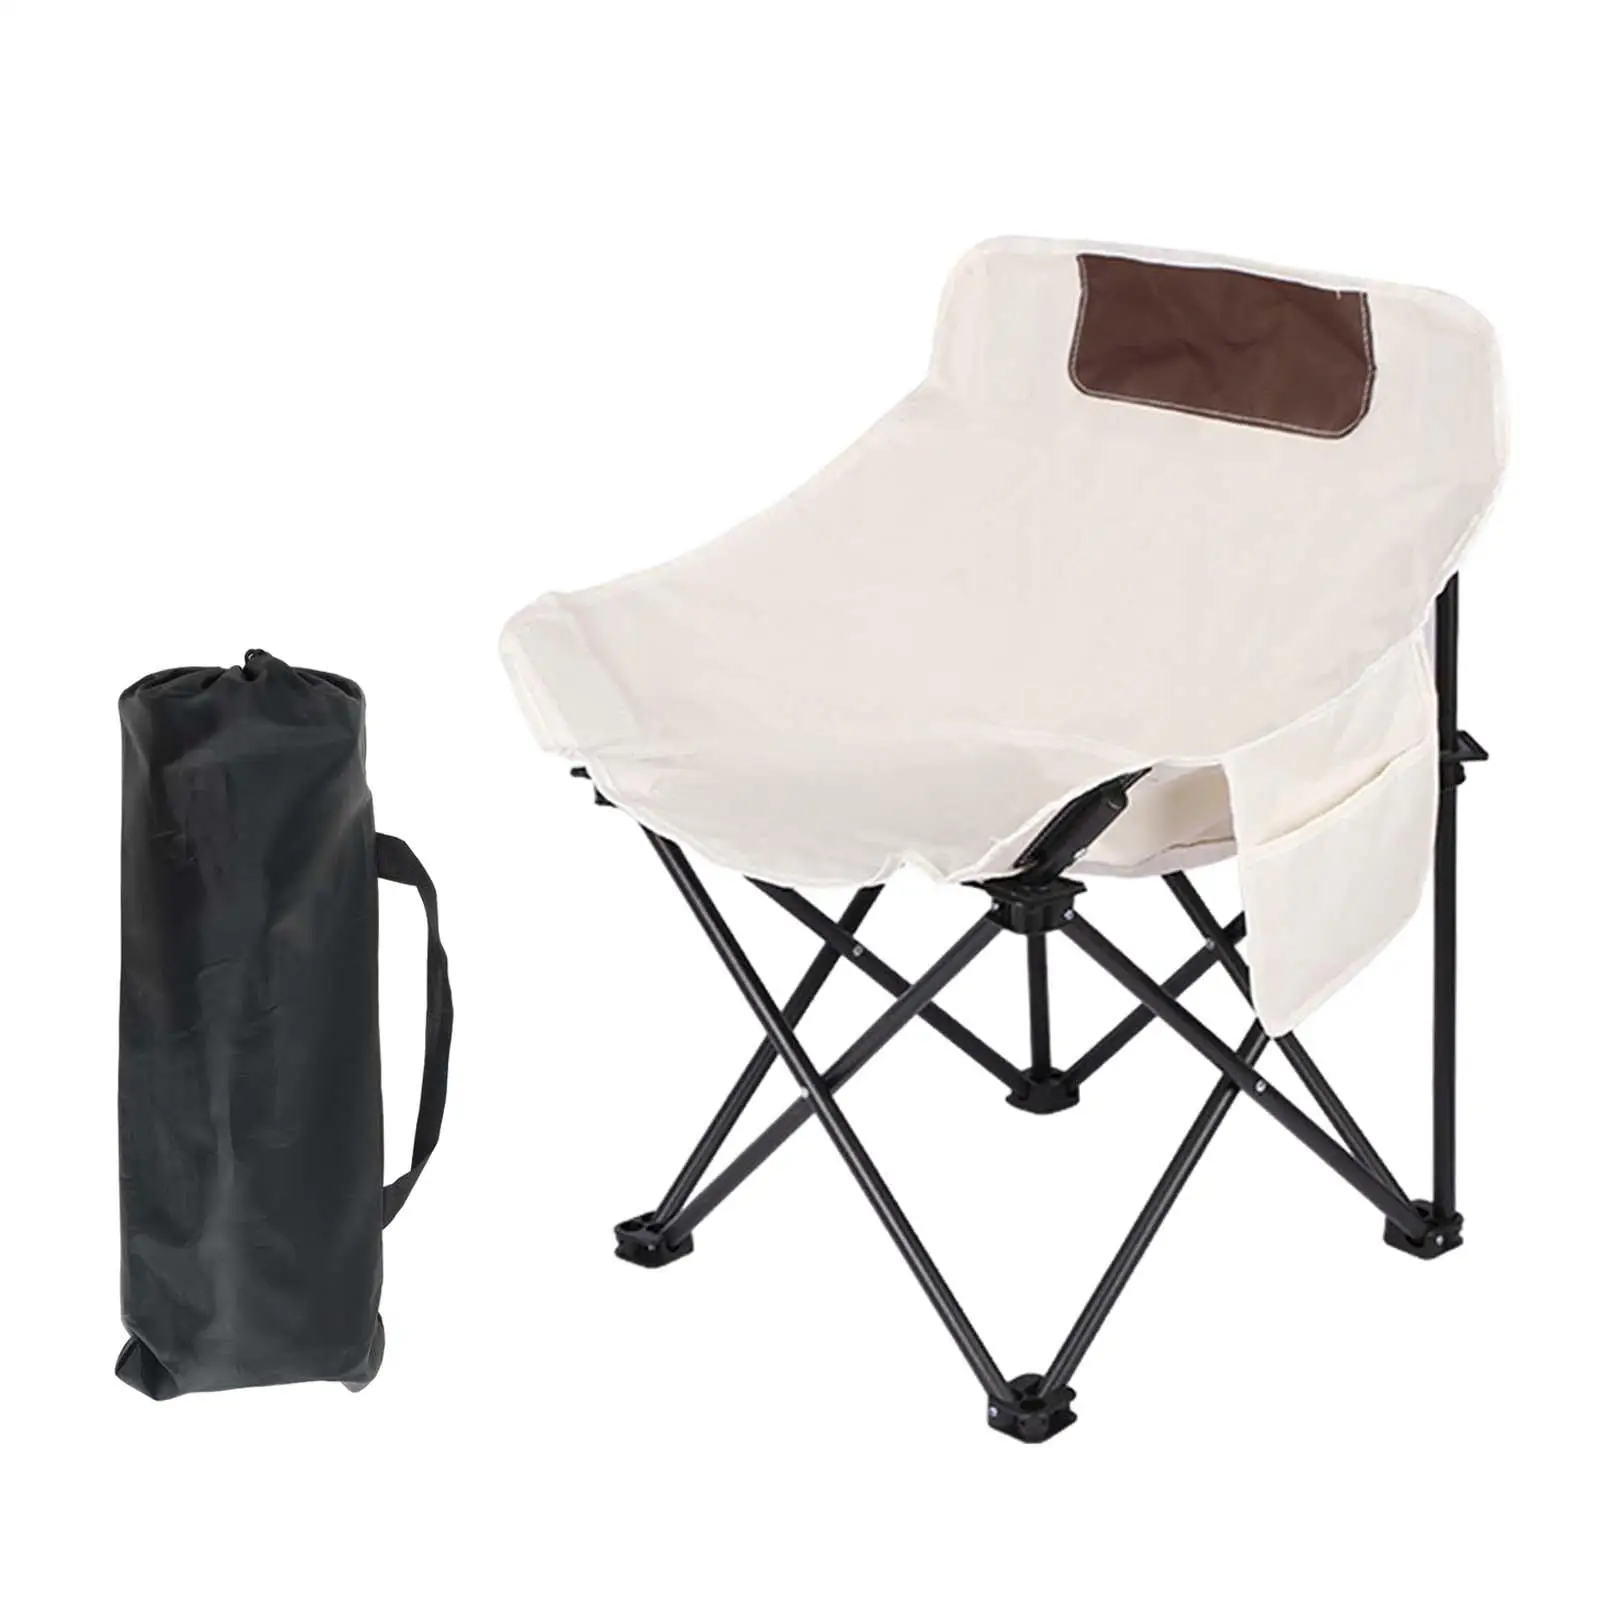 Folding Camping Chair Outdoor Moon Chair with Pocket 150kg Heavy Duty Nonslip Beach Chair Portable Folding Chair for Backyard